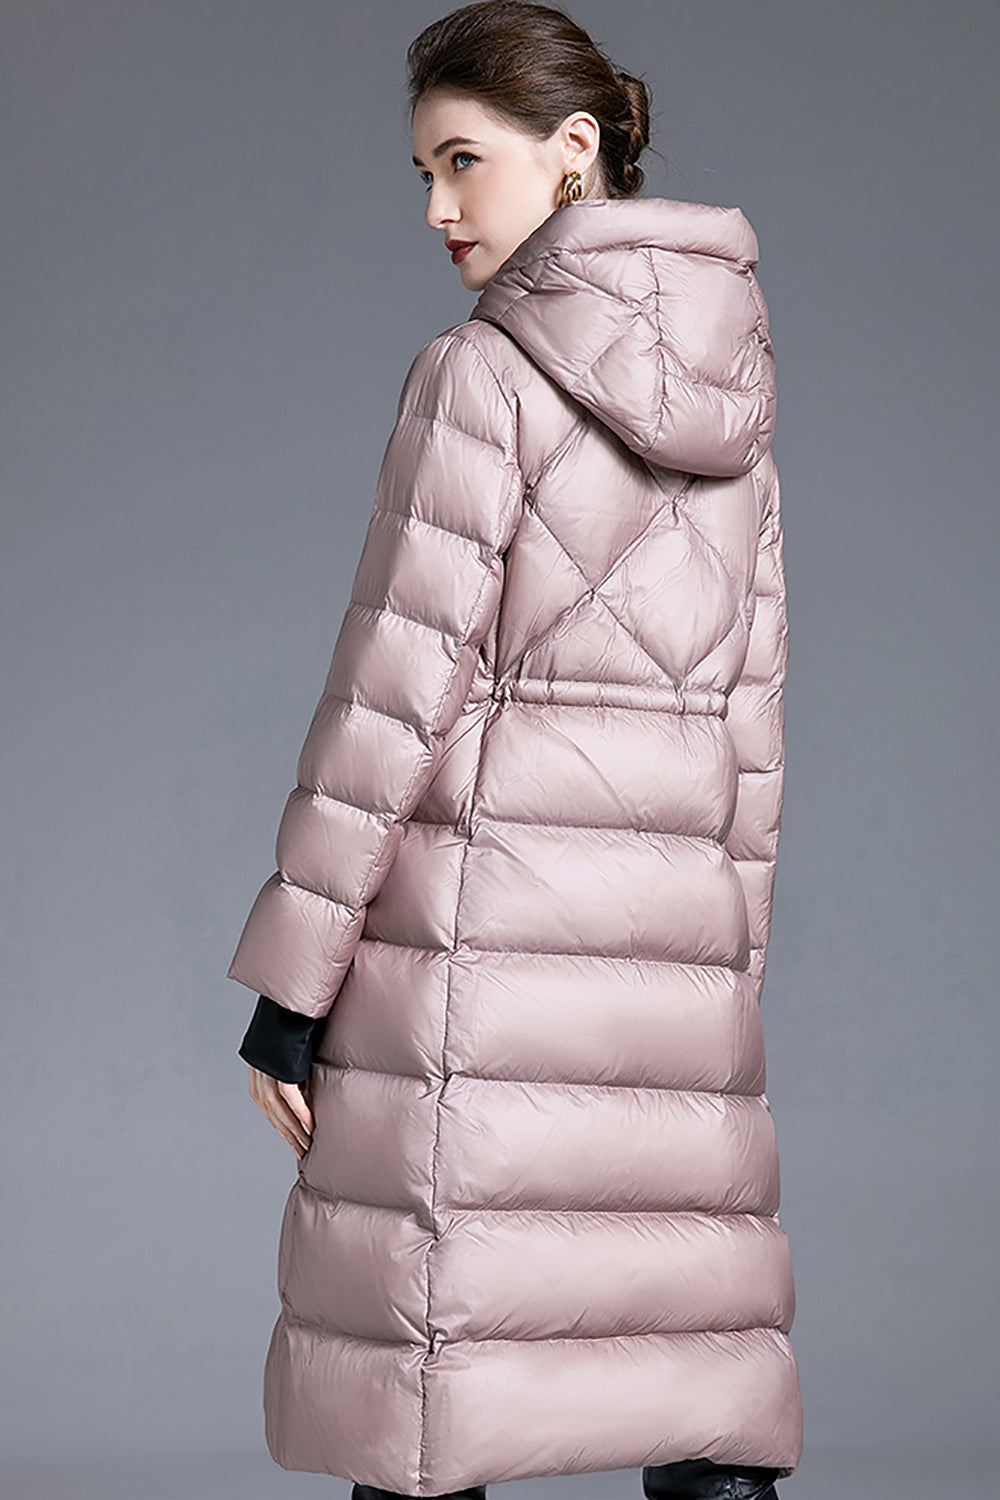 Pink Long Sleeves Winter Down Jacket with Pockets